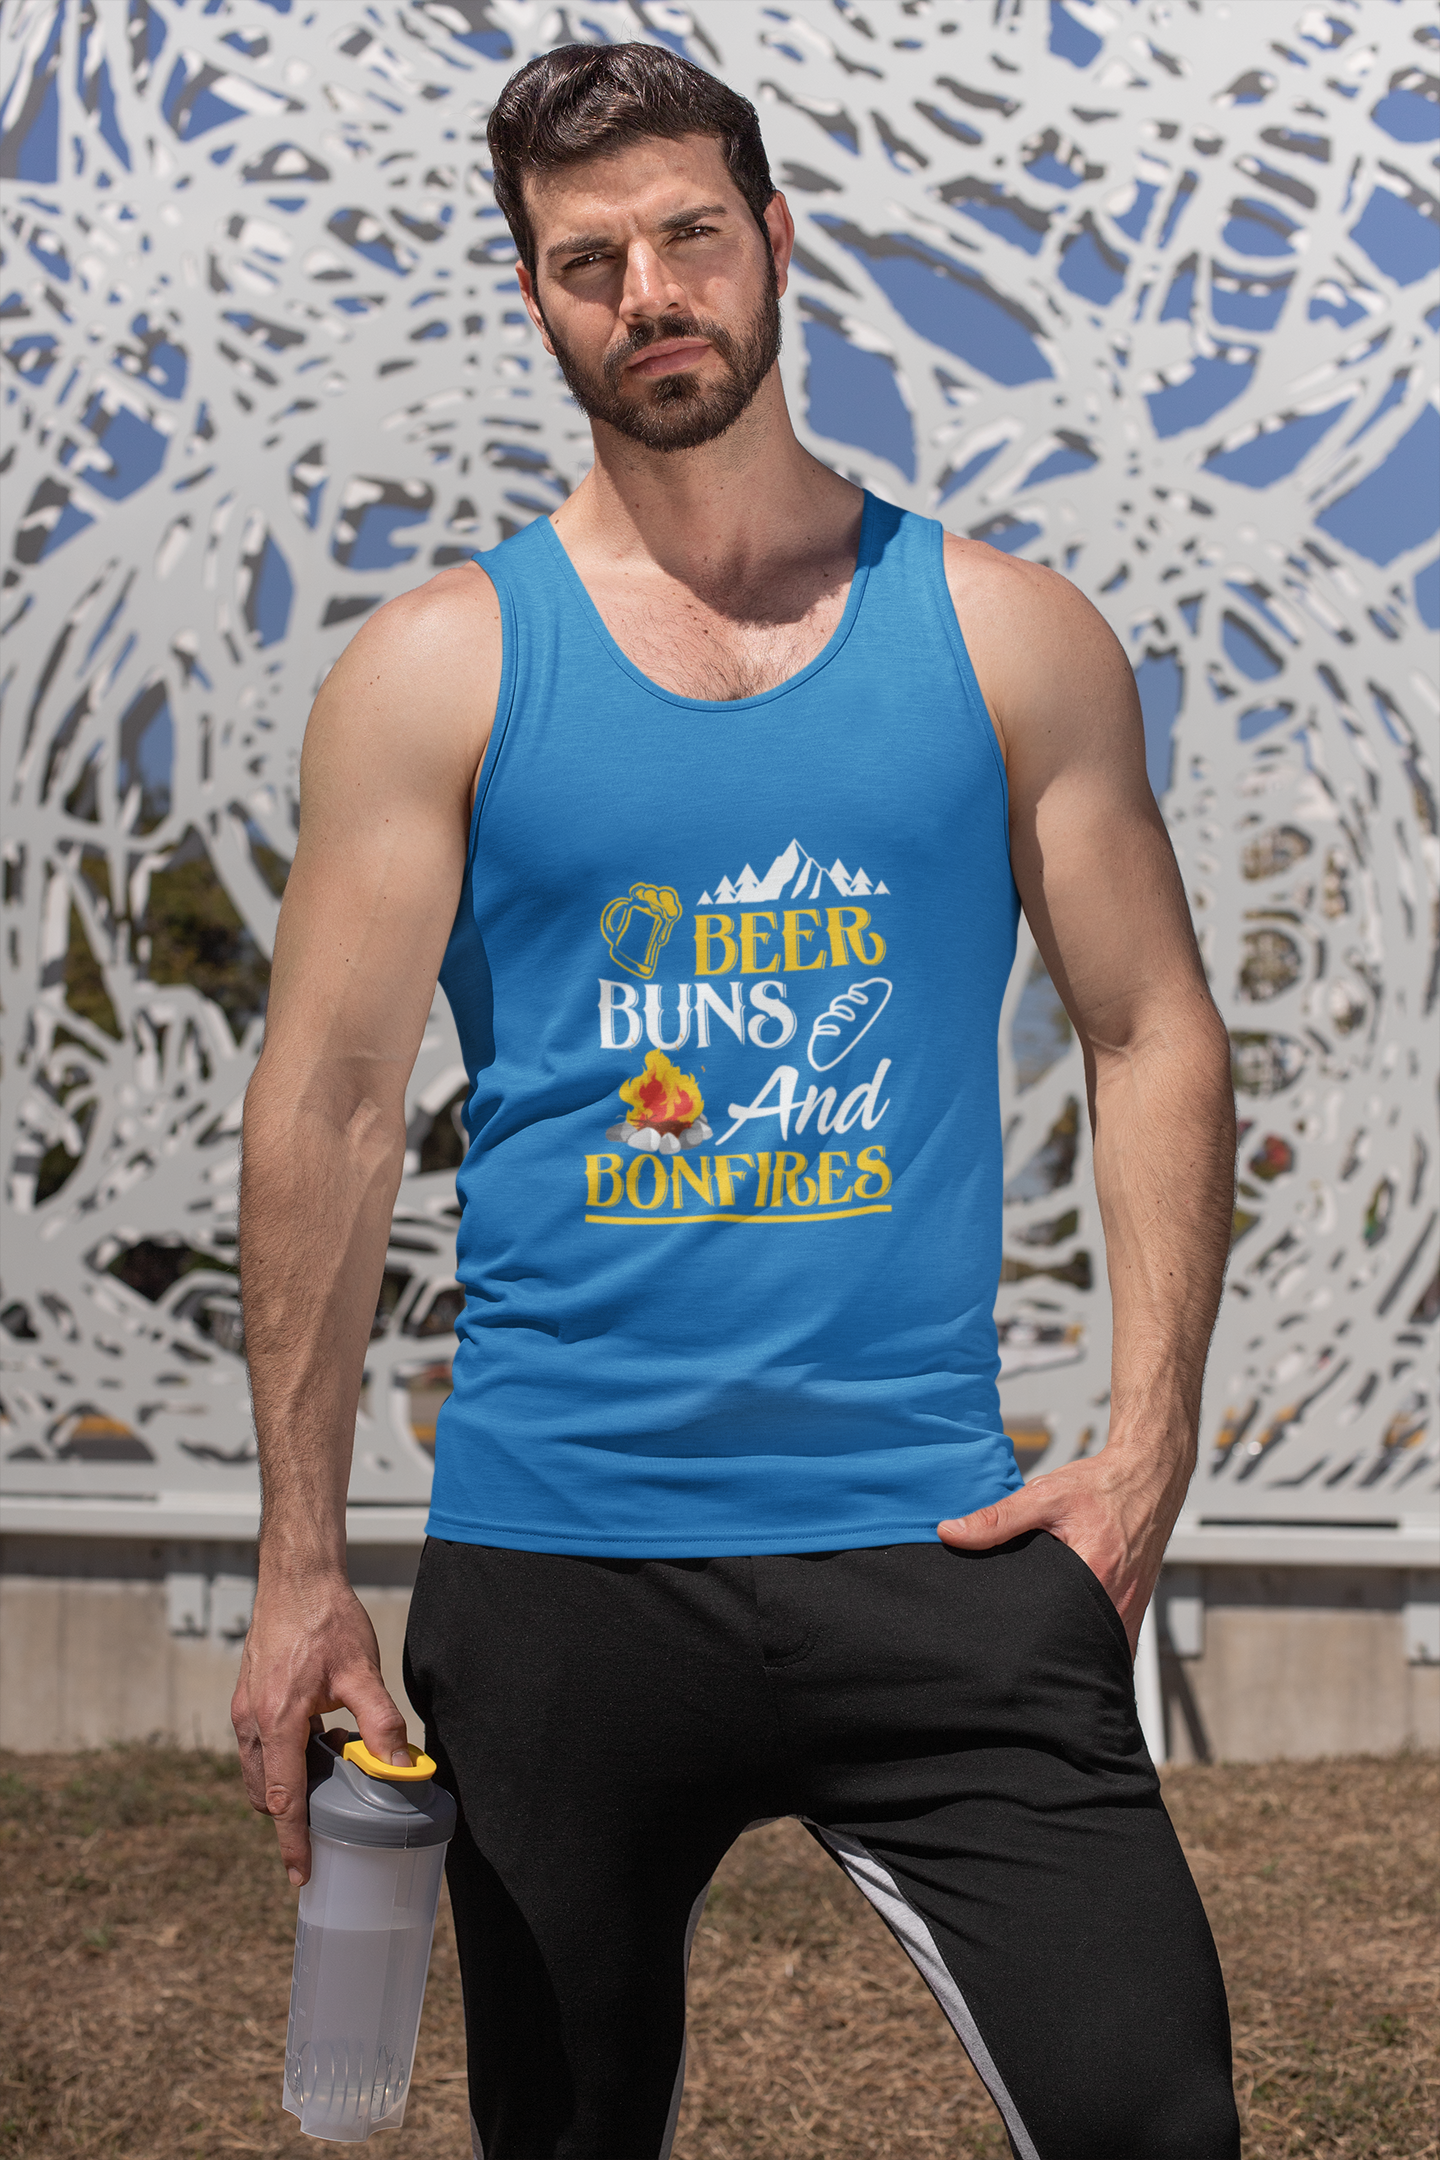 Beer, Buns, bonfires , ; Soft 100% cotton tank top. Removable tag for comfort